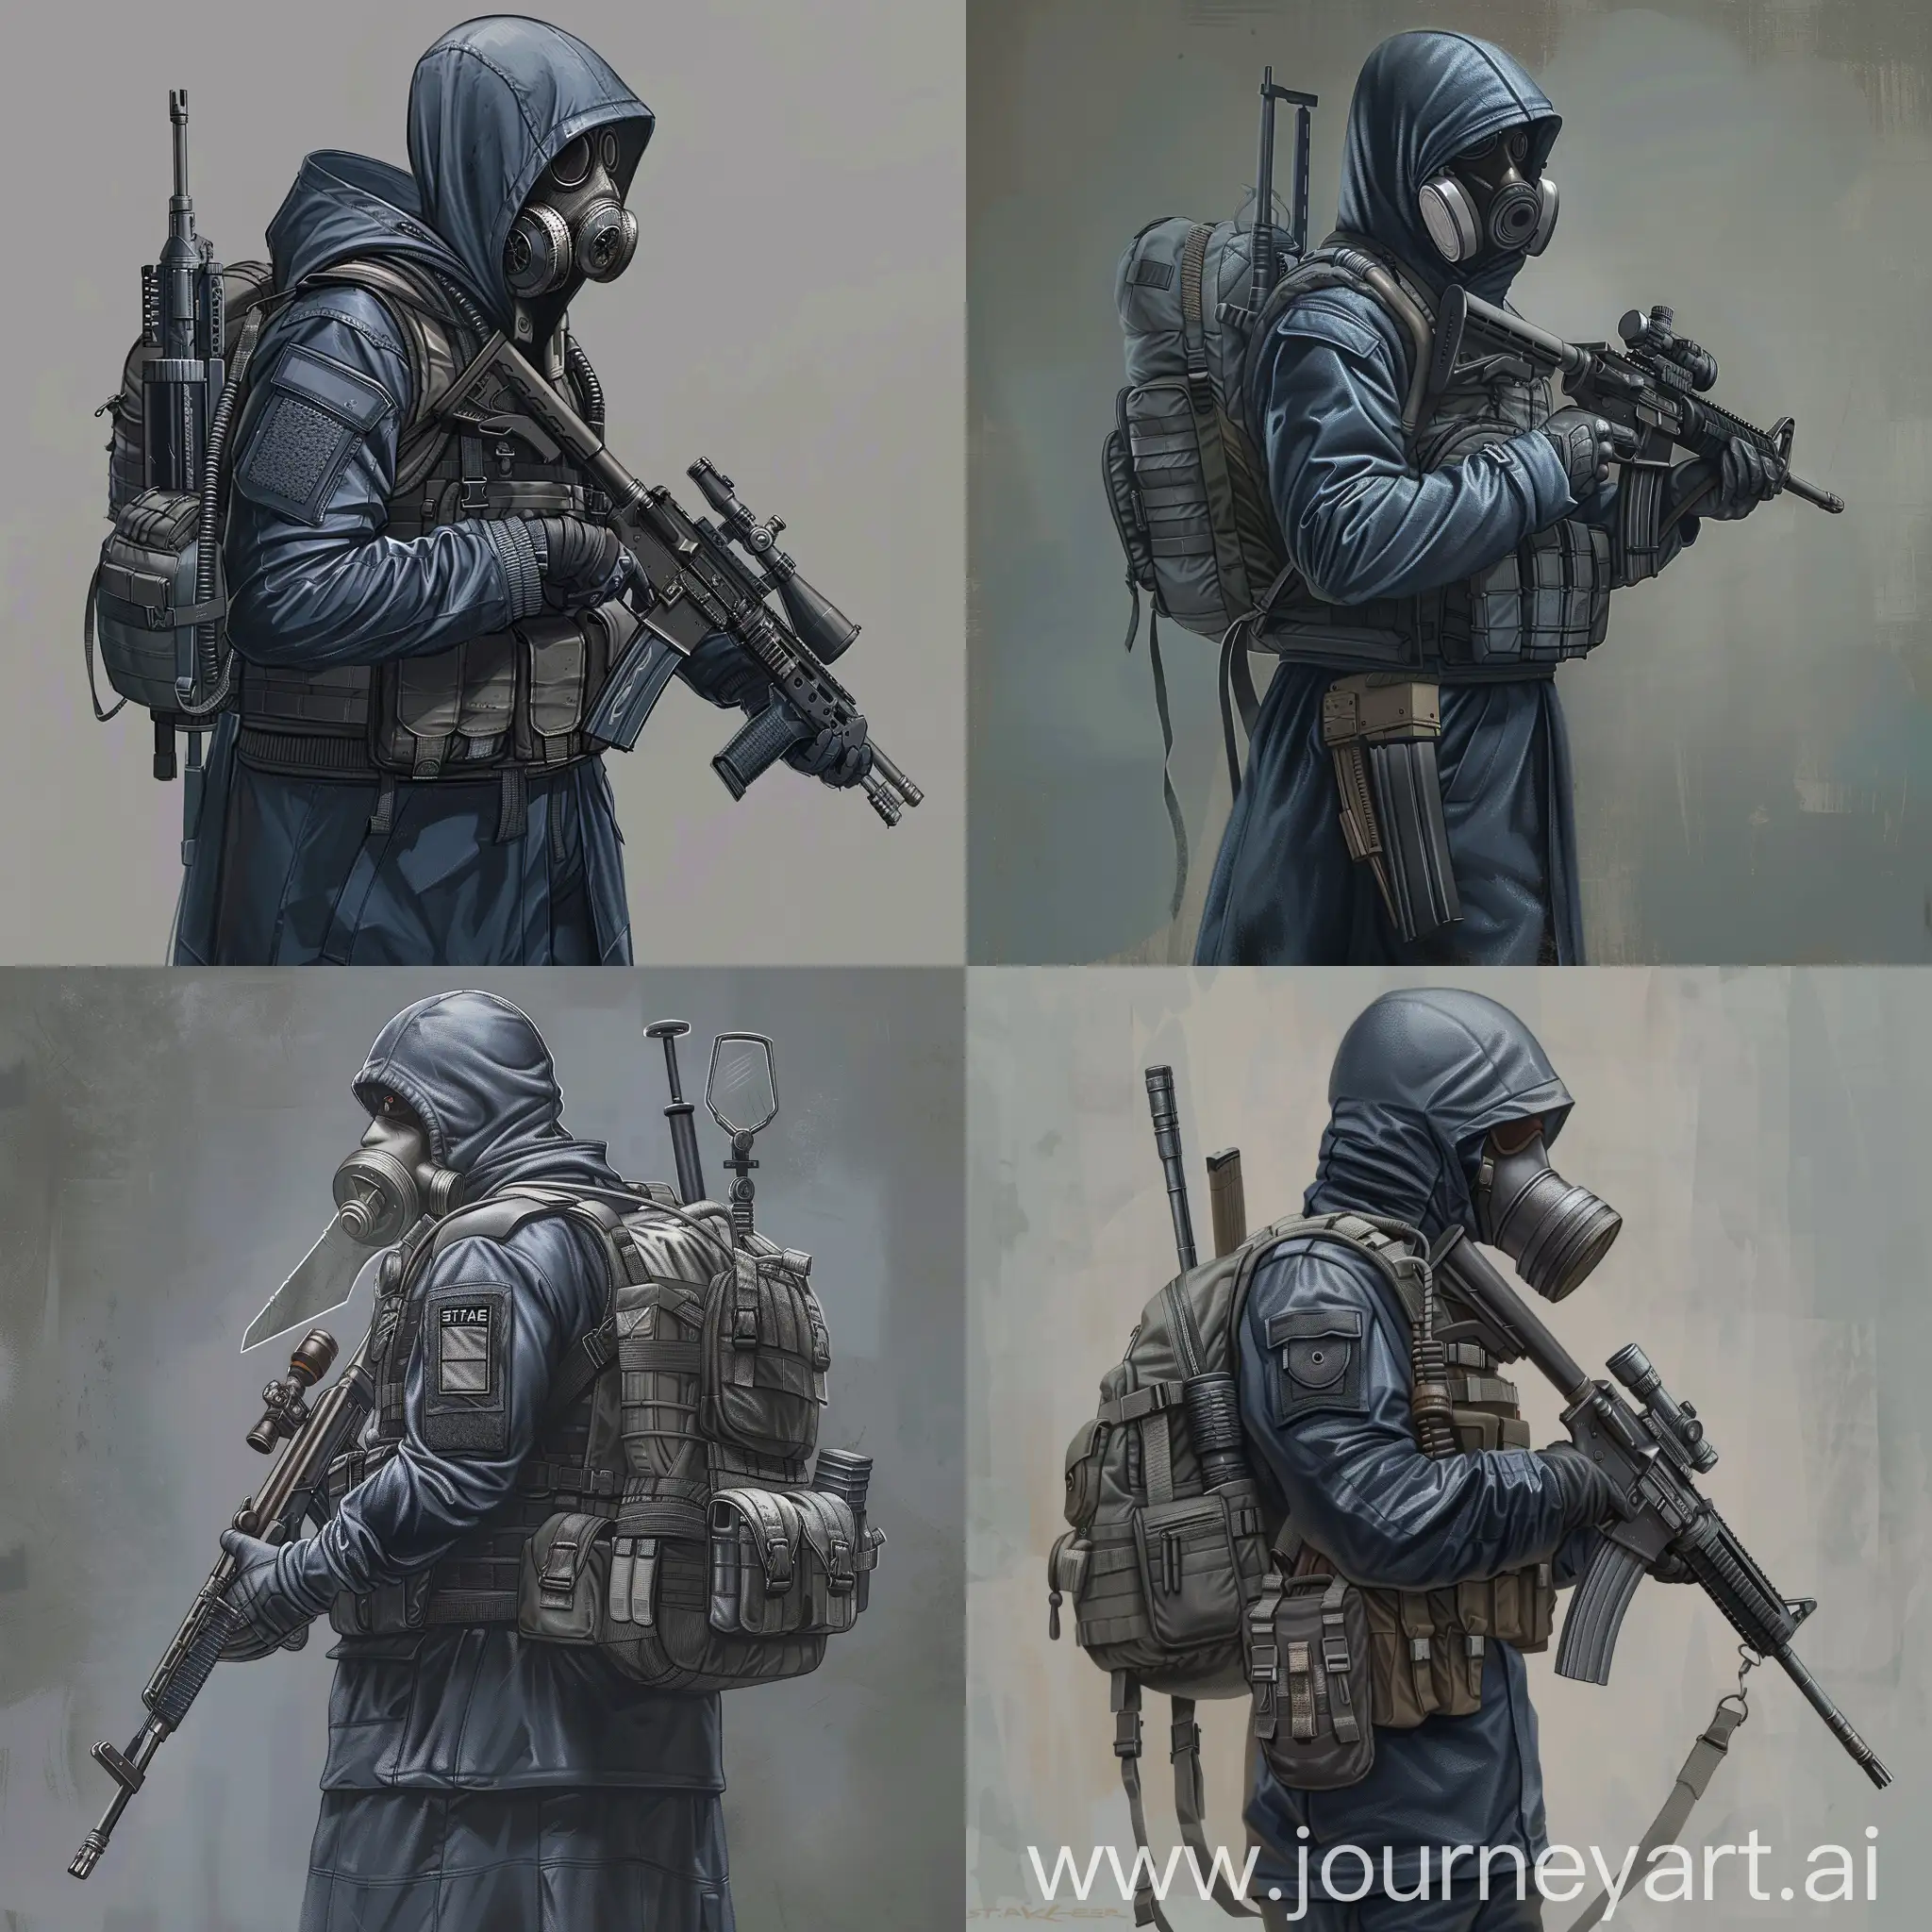 Digital concept art of a mercenary from the universe of S.T.A.L.K.E.R., dressed in a dark blue military raincoat, gray military armor on his body, a gasmask on his face, a military backpack on the back, a rifle in the hands of a mercenary.